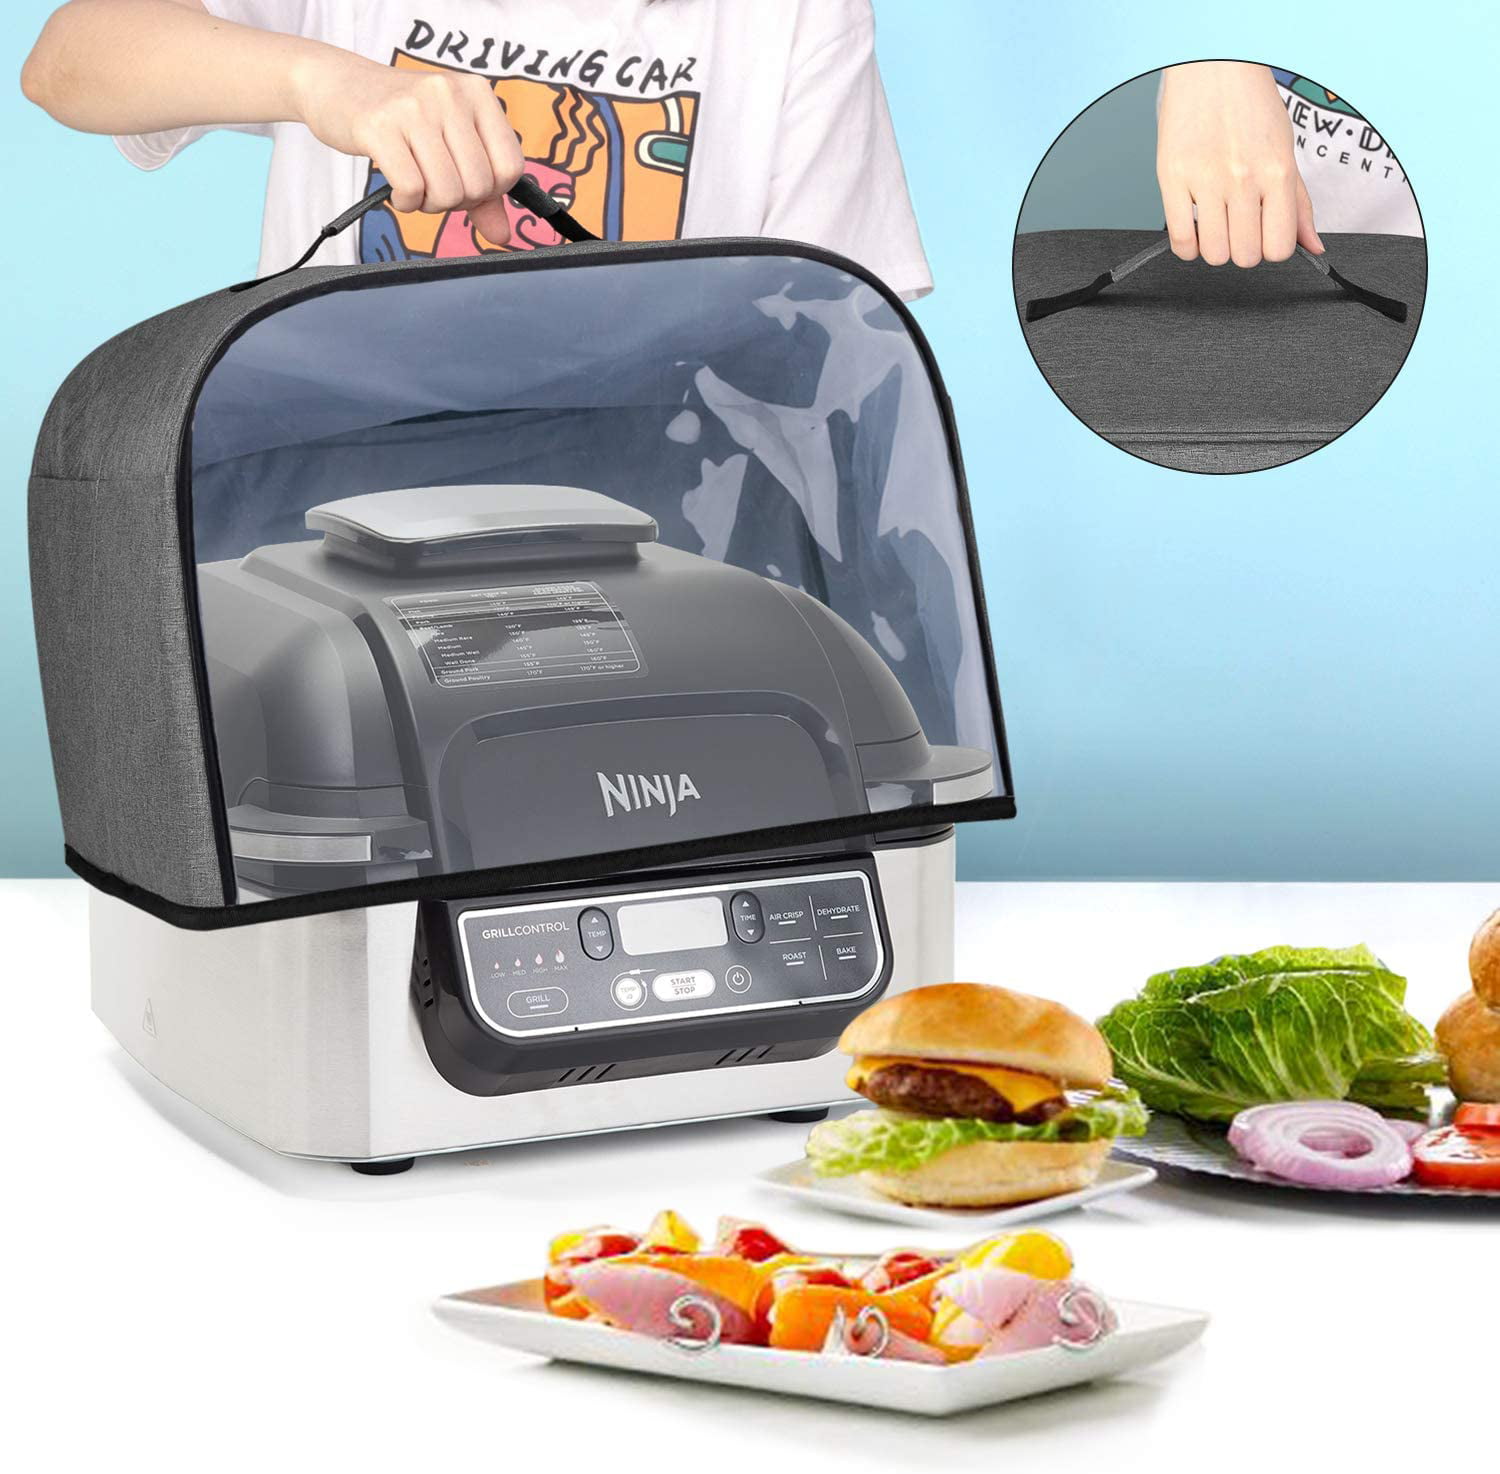 Kitchen Small Appliances Cover with Accessory Storage Pockets and Handles Water Resistant Fabric Large Size 13.5 x 14 x 9.75 Dust Cover Compatible with Ninja Foodi Grill AG301, AG302, AG400 